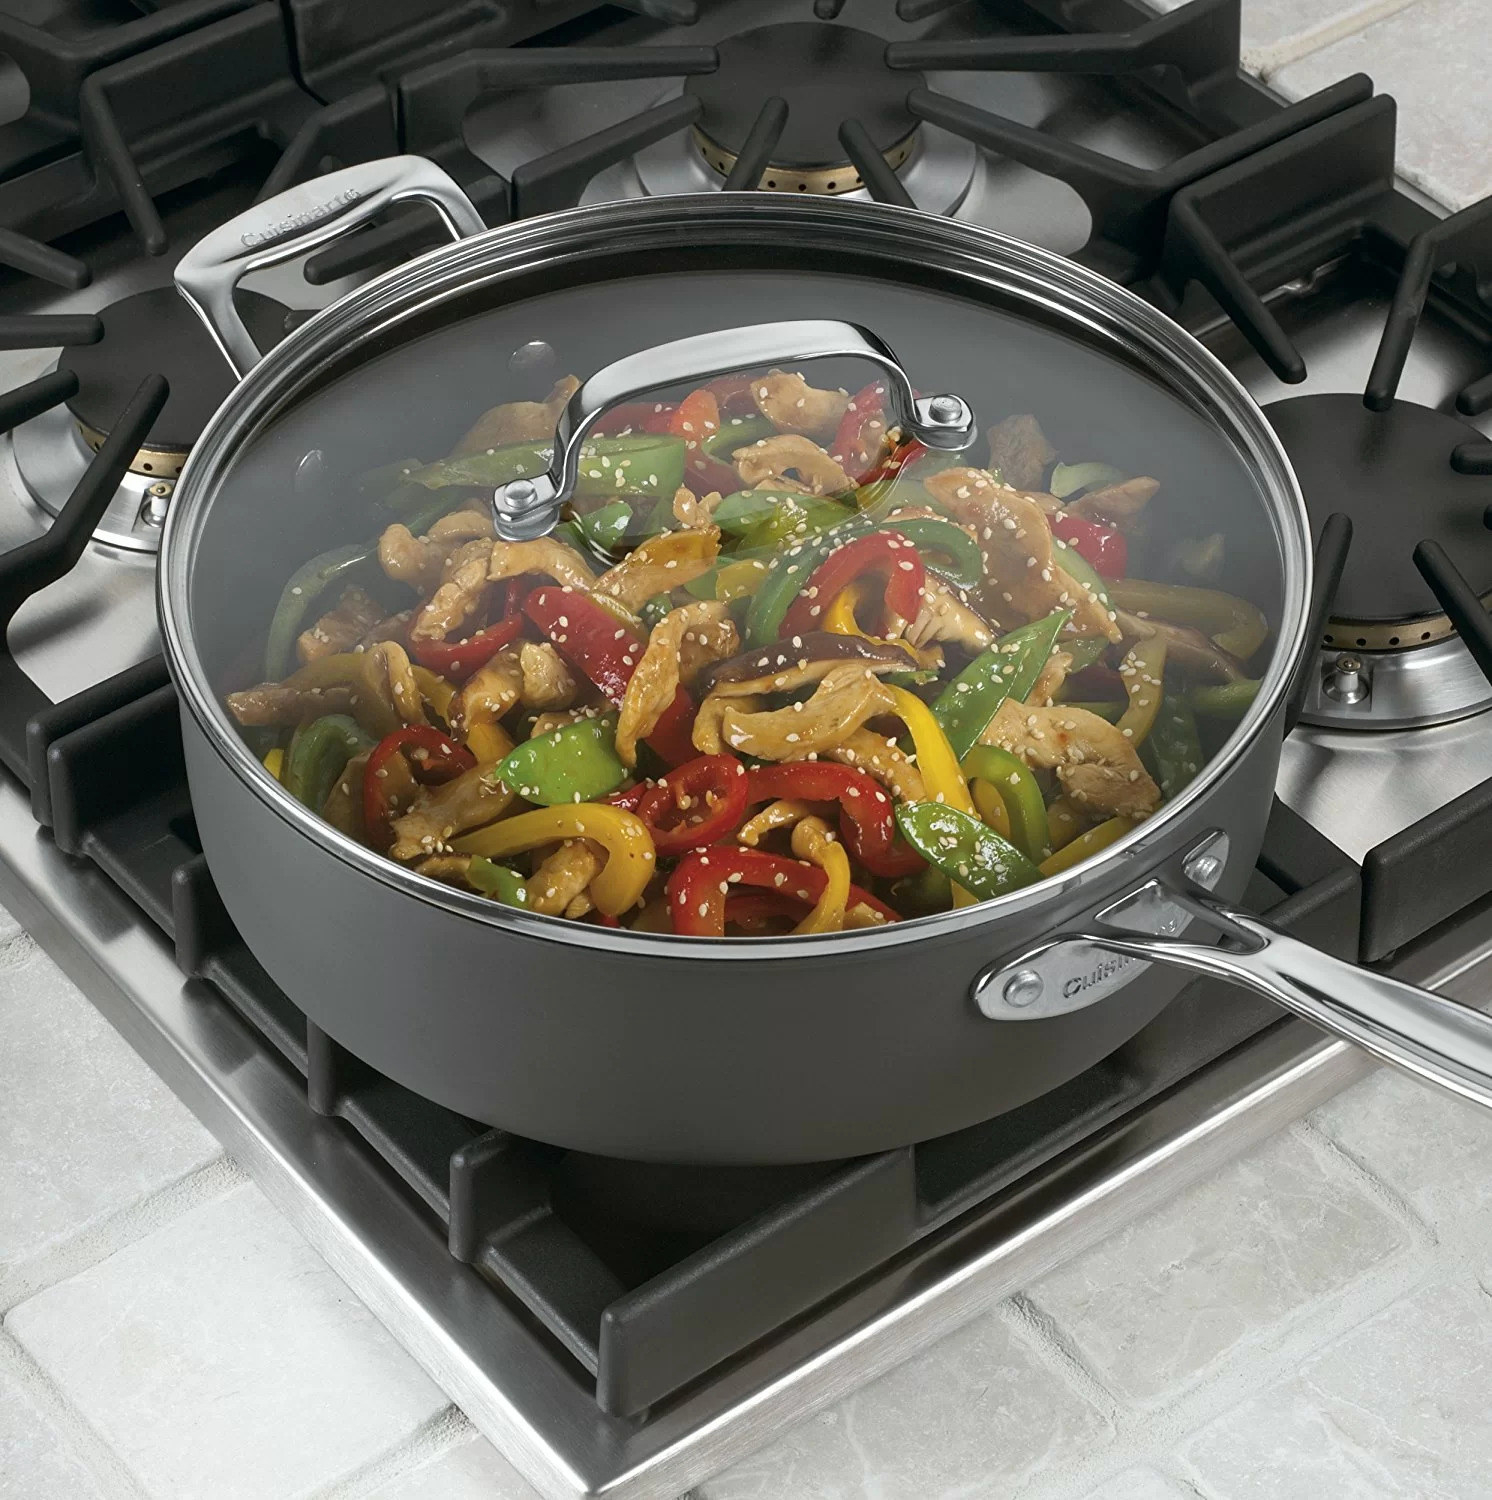 The sauté pan and cover